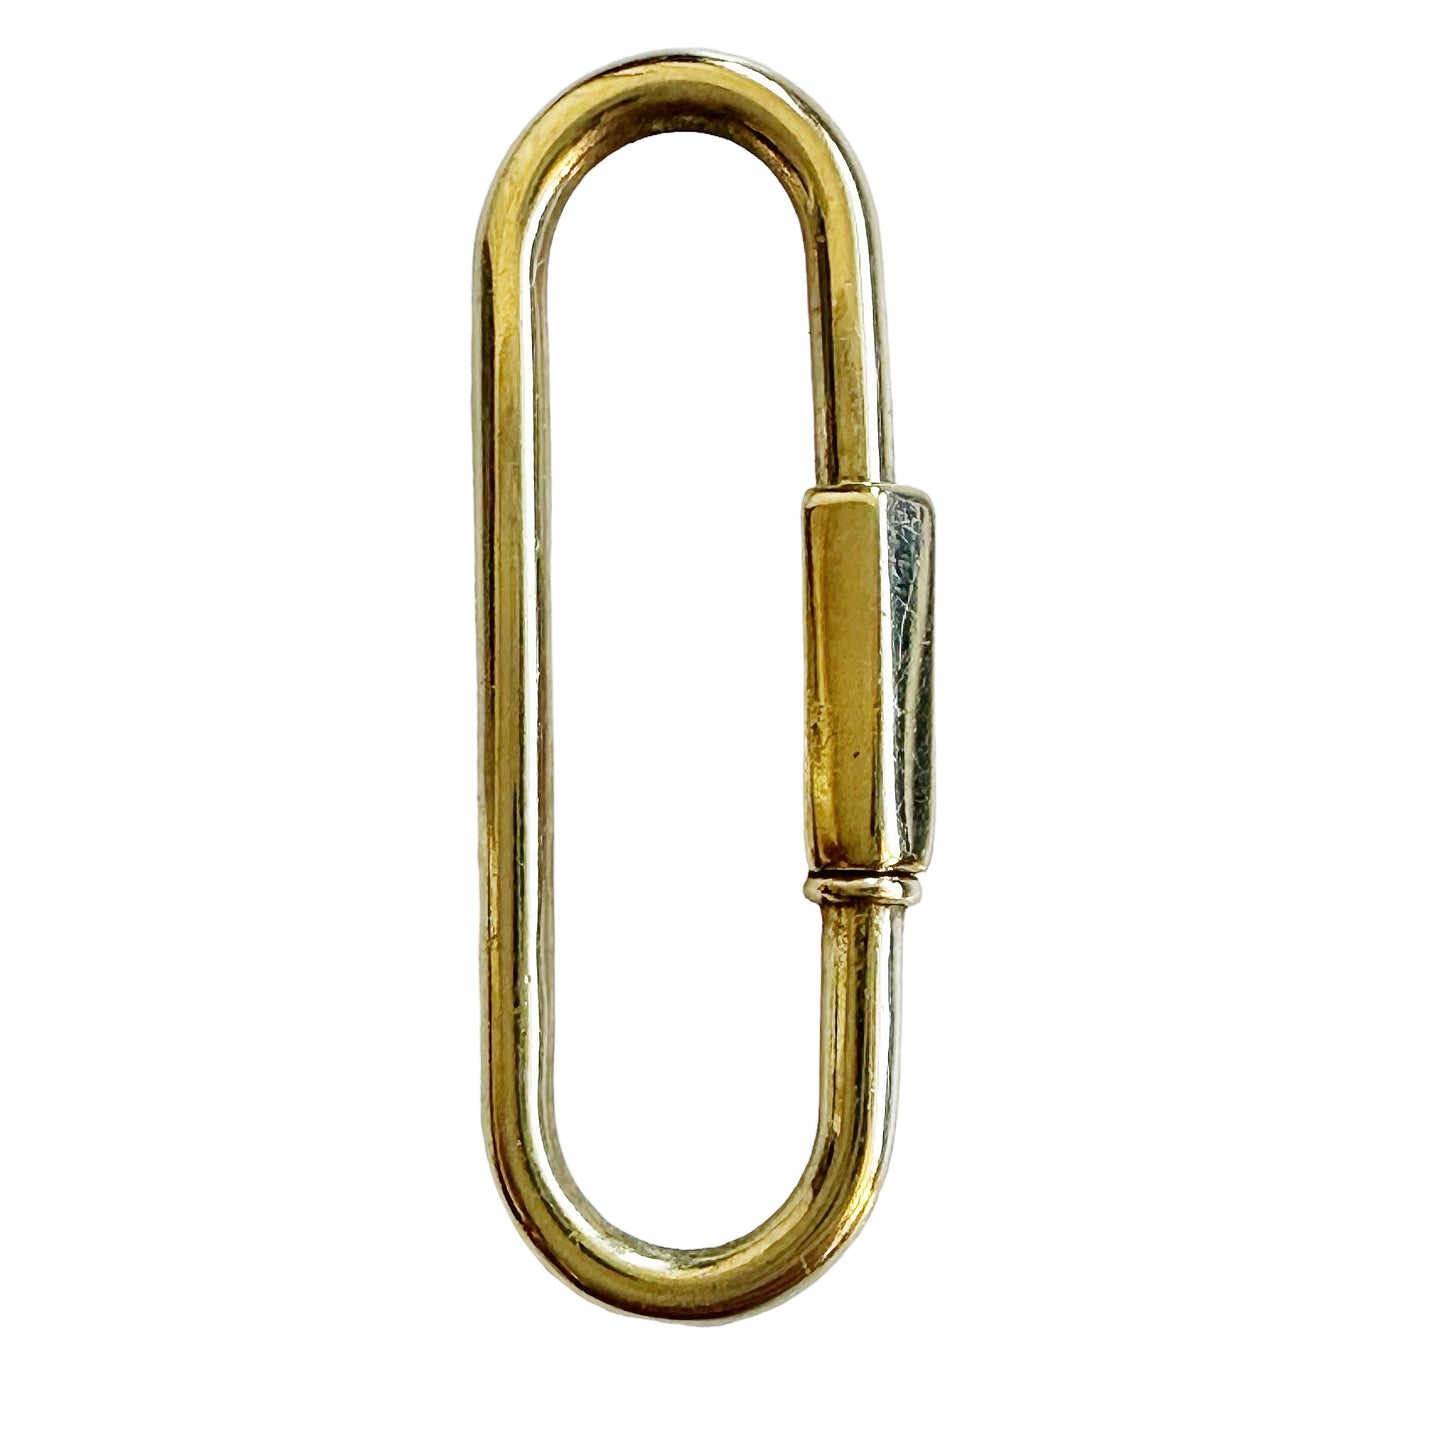 Gold Elongated Carabiner Connector